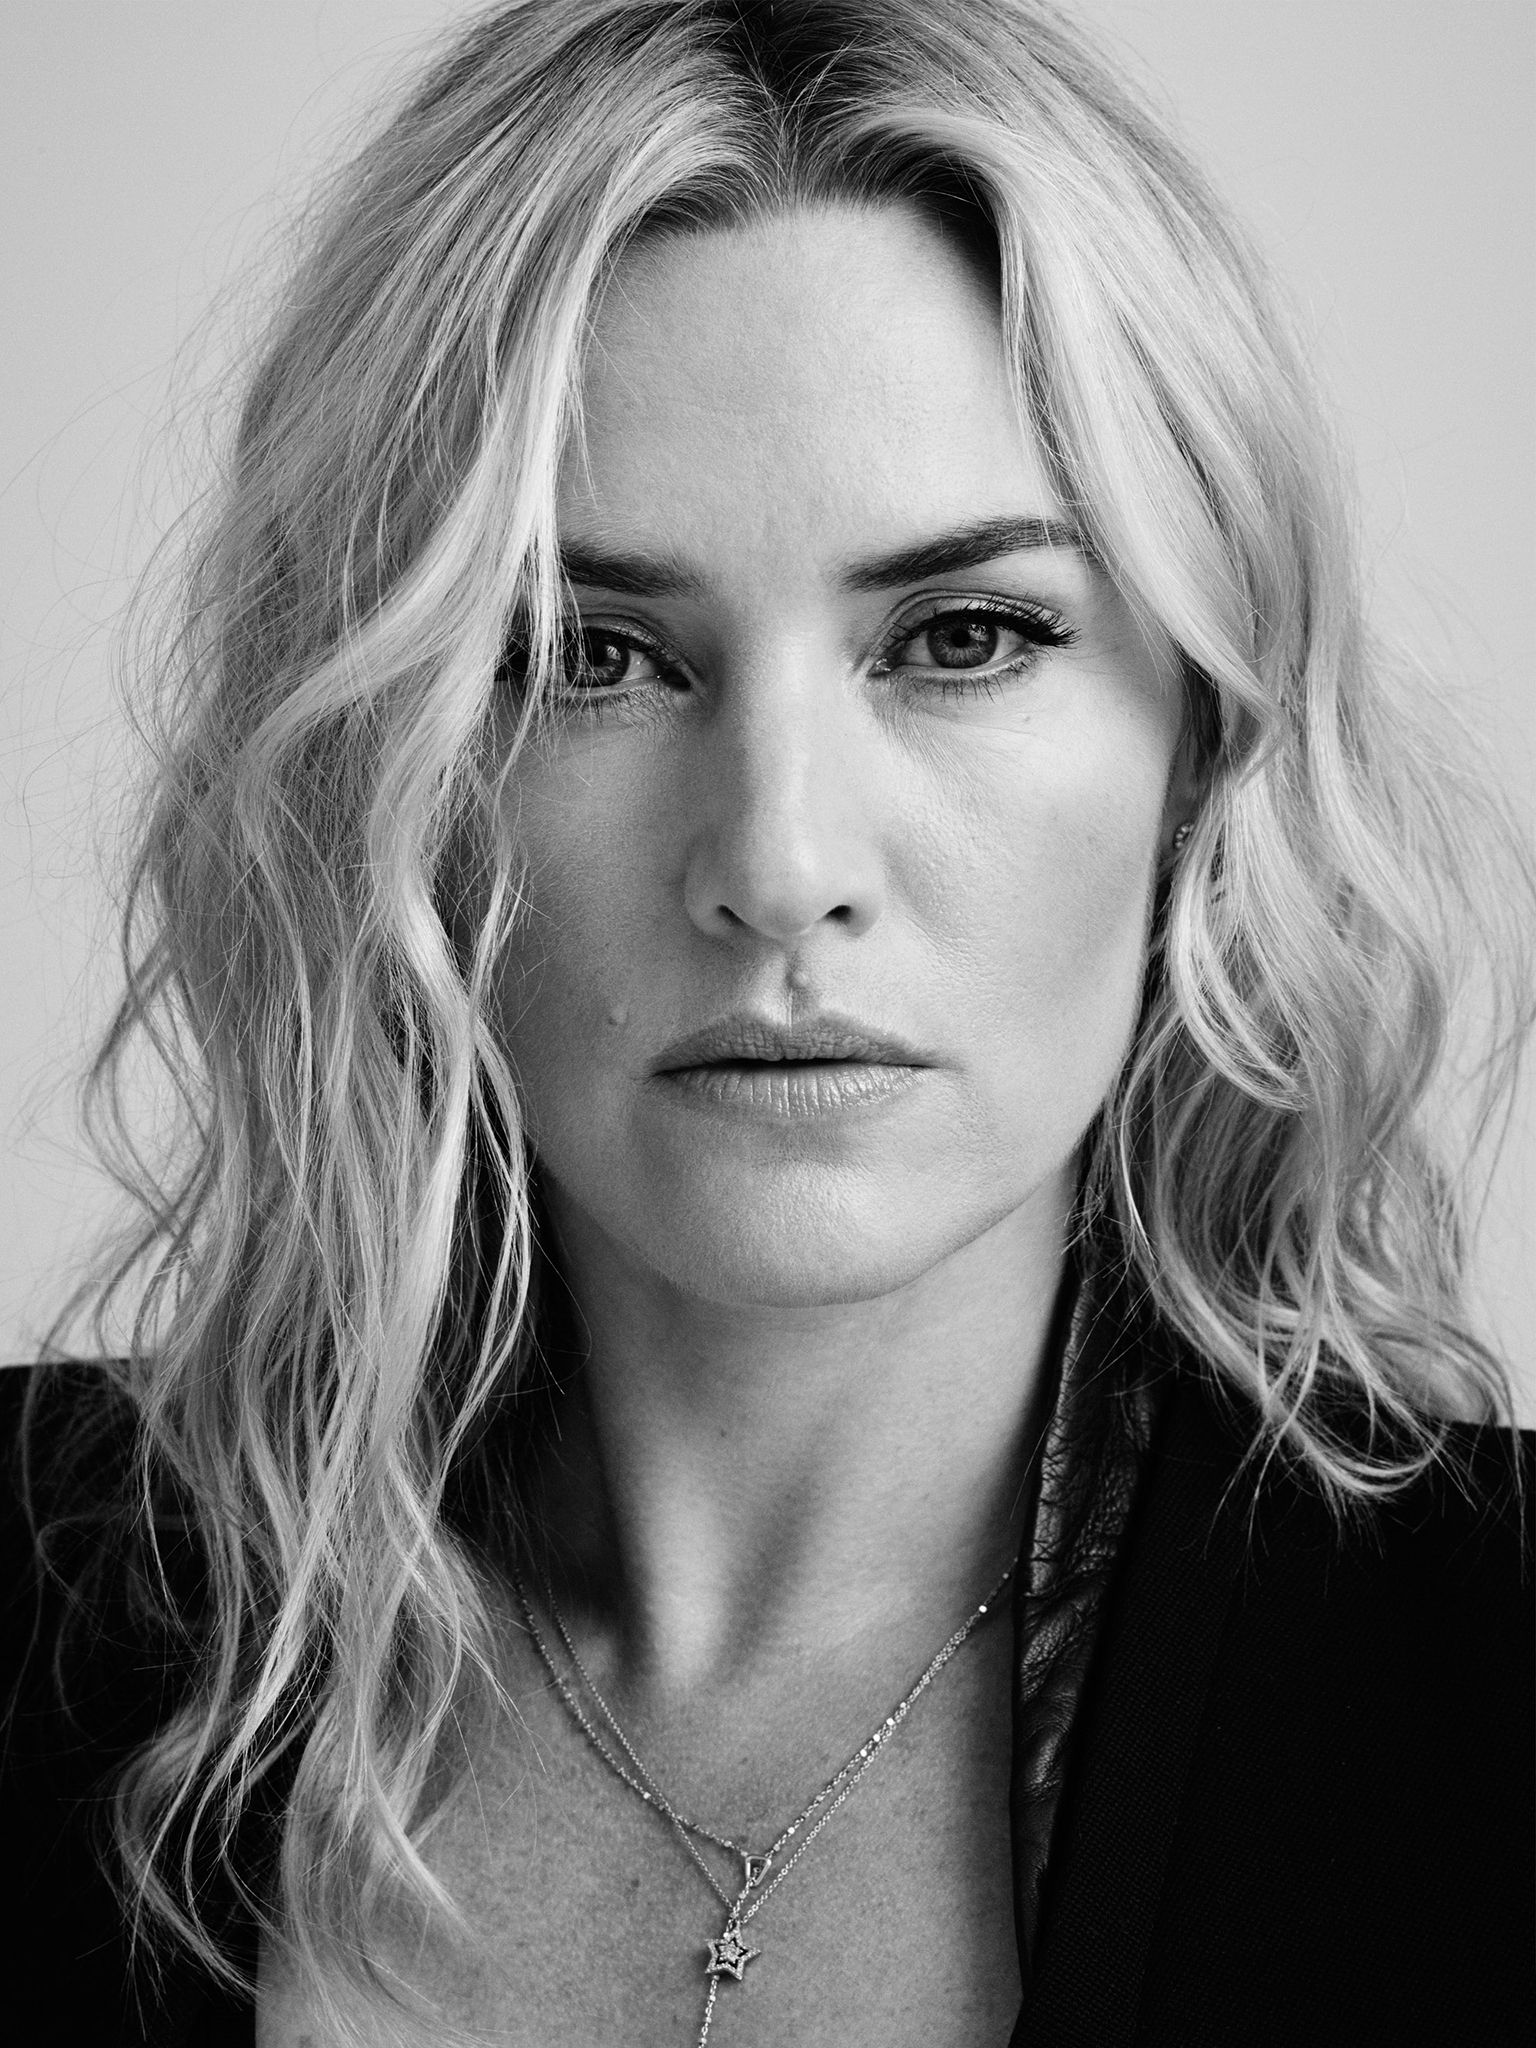 Kate Winslet photo 858 of 960 pics, wallpaper - photo #1186212 - ThePlace2